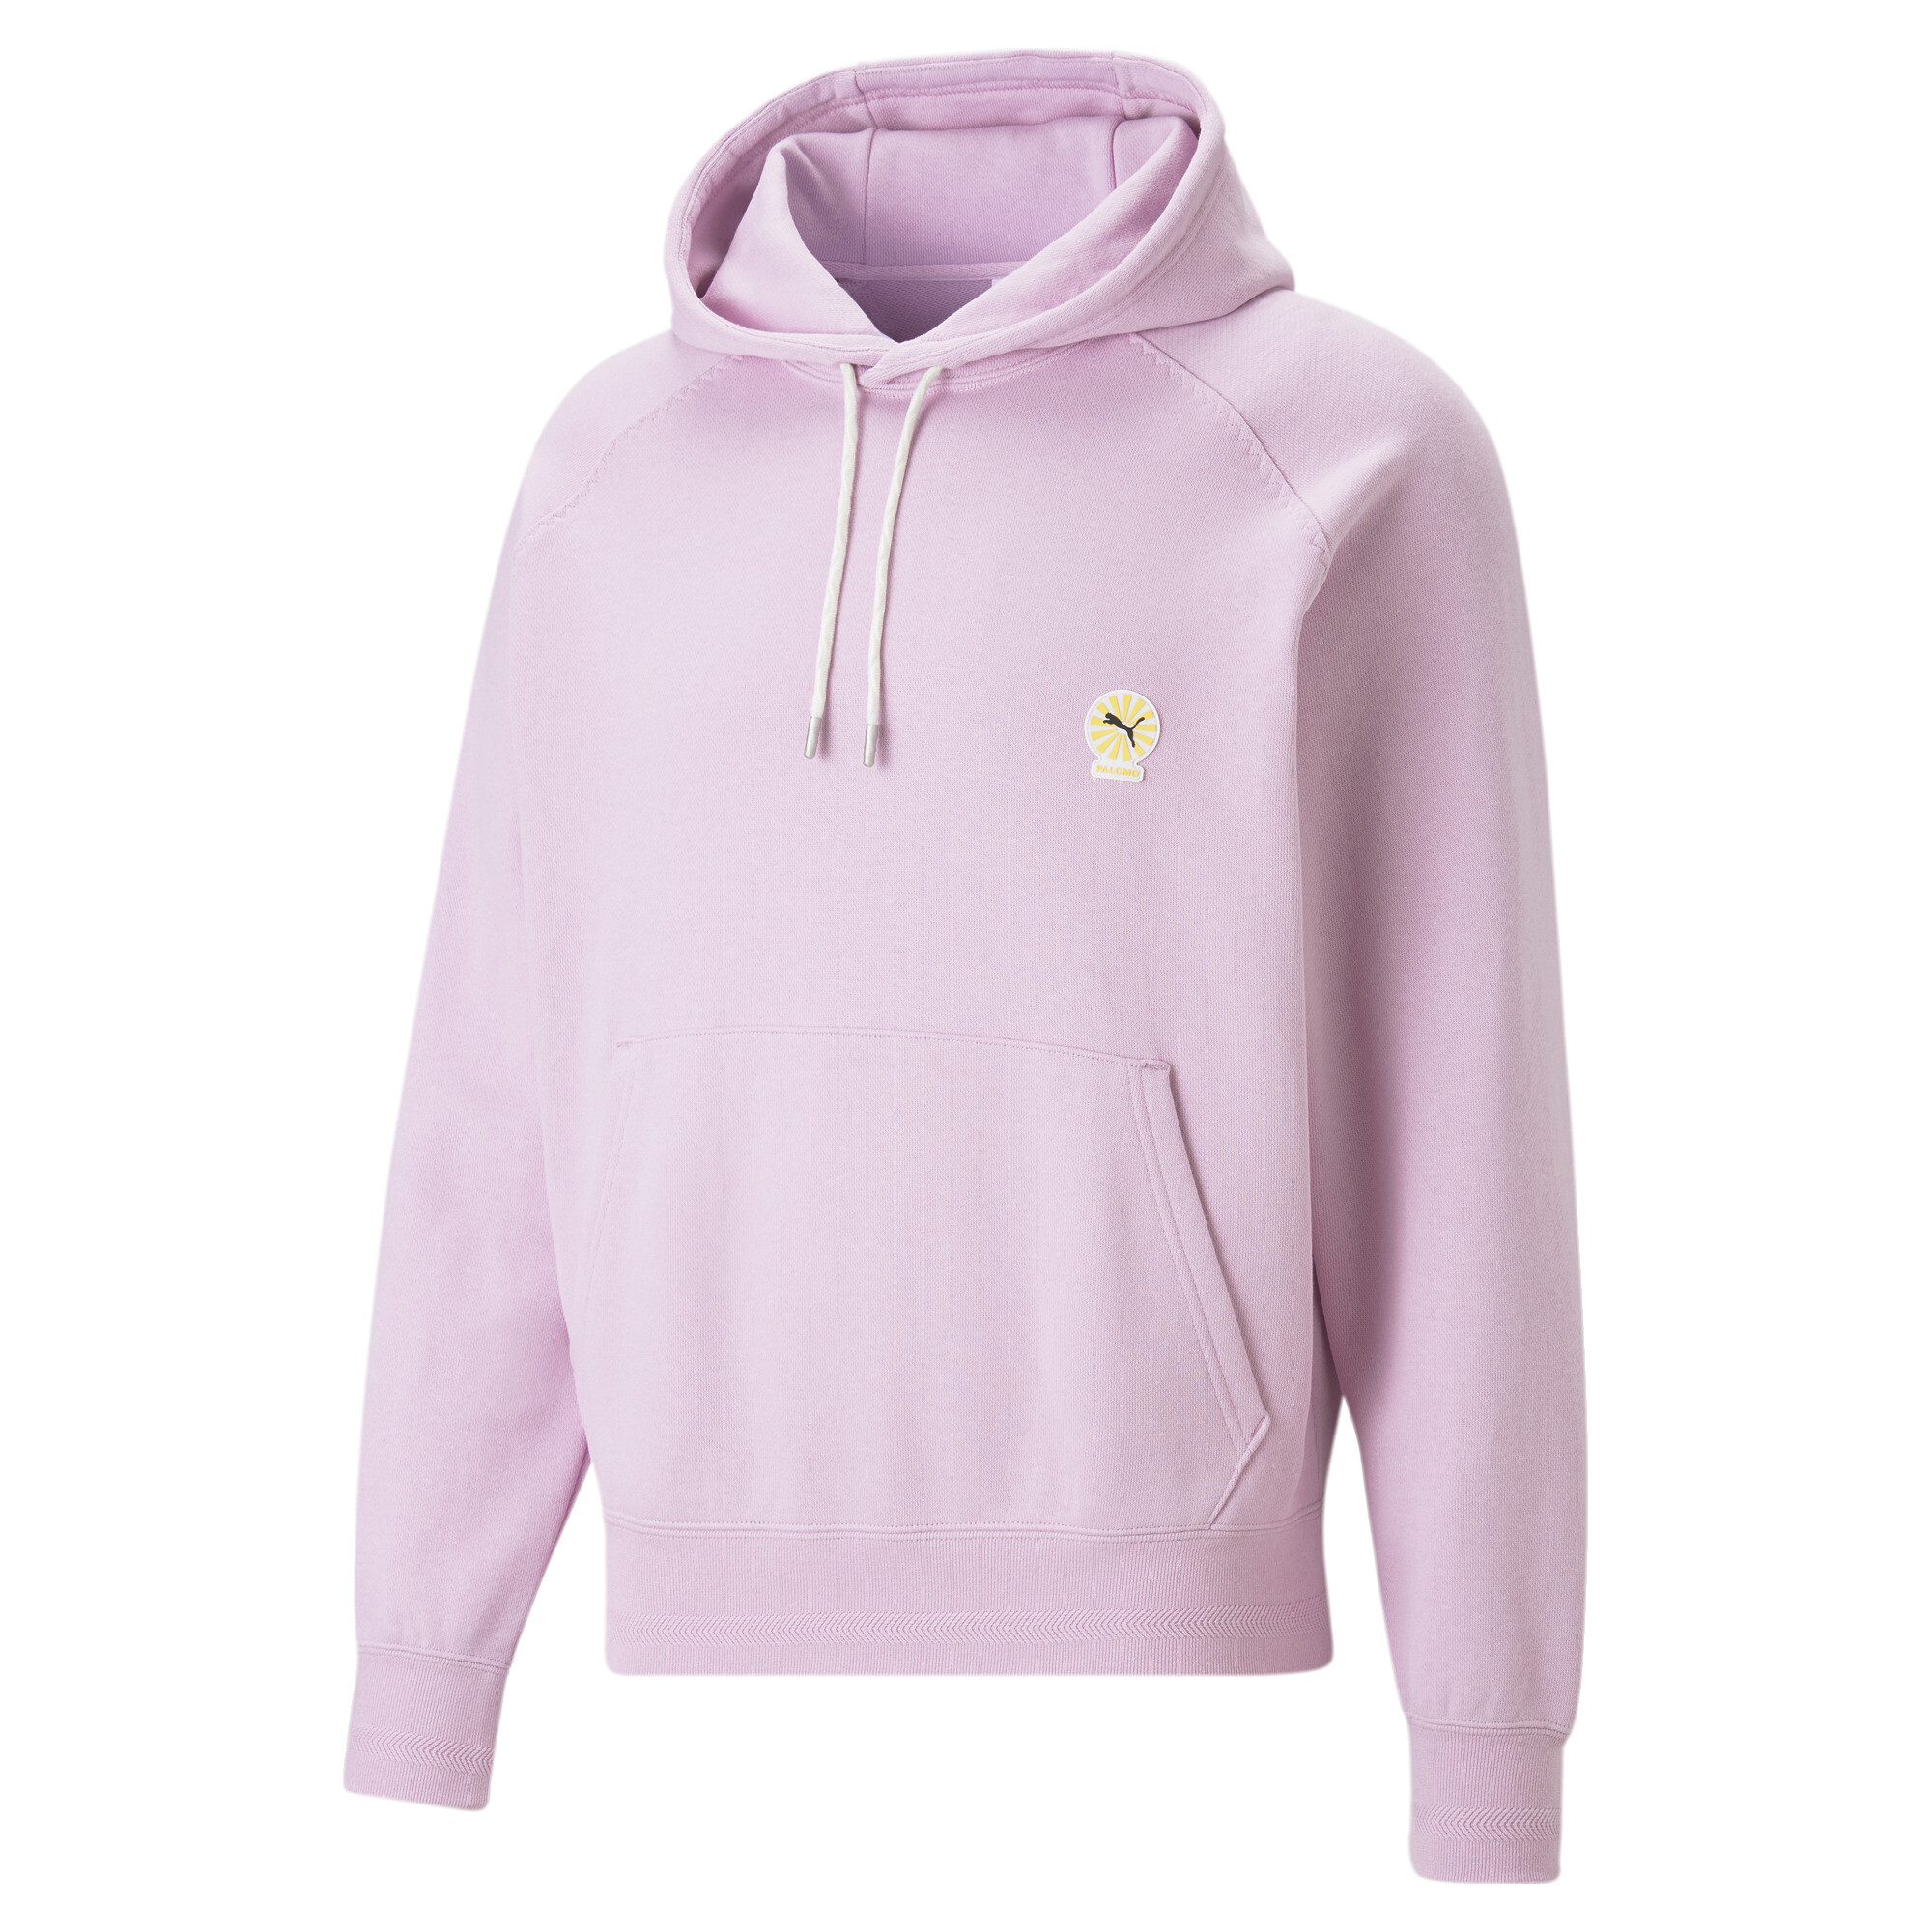 Men's PUMA X PALOMO Hoodie In Pink, Size Small